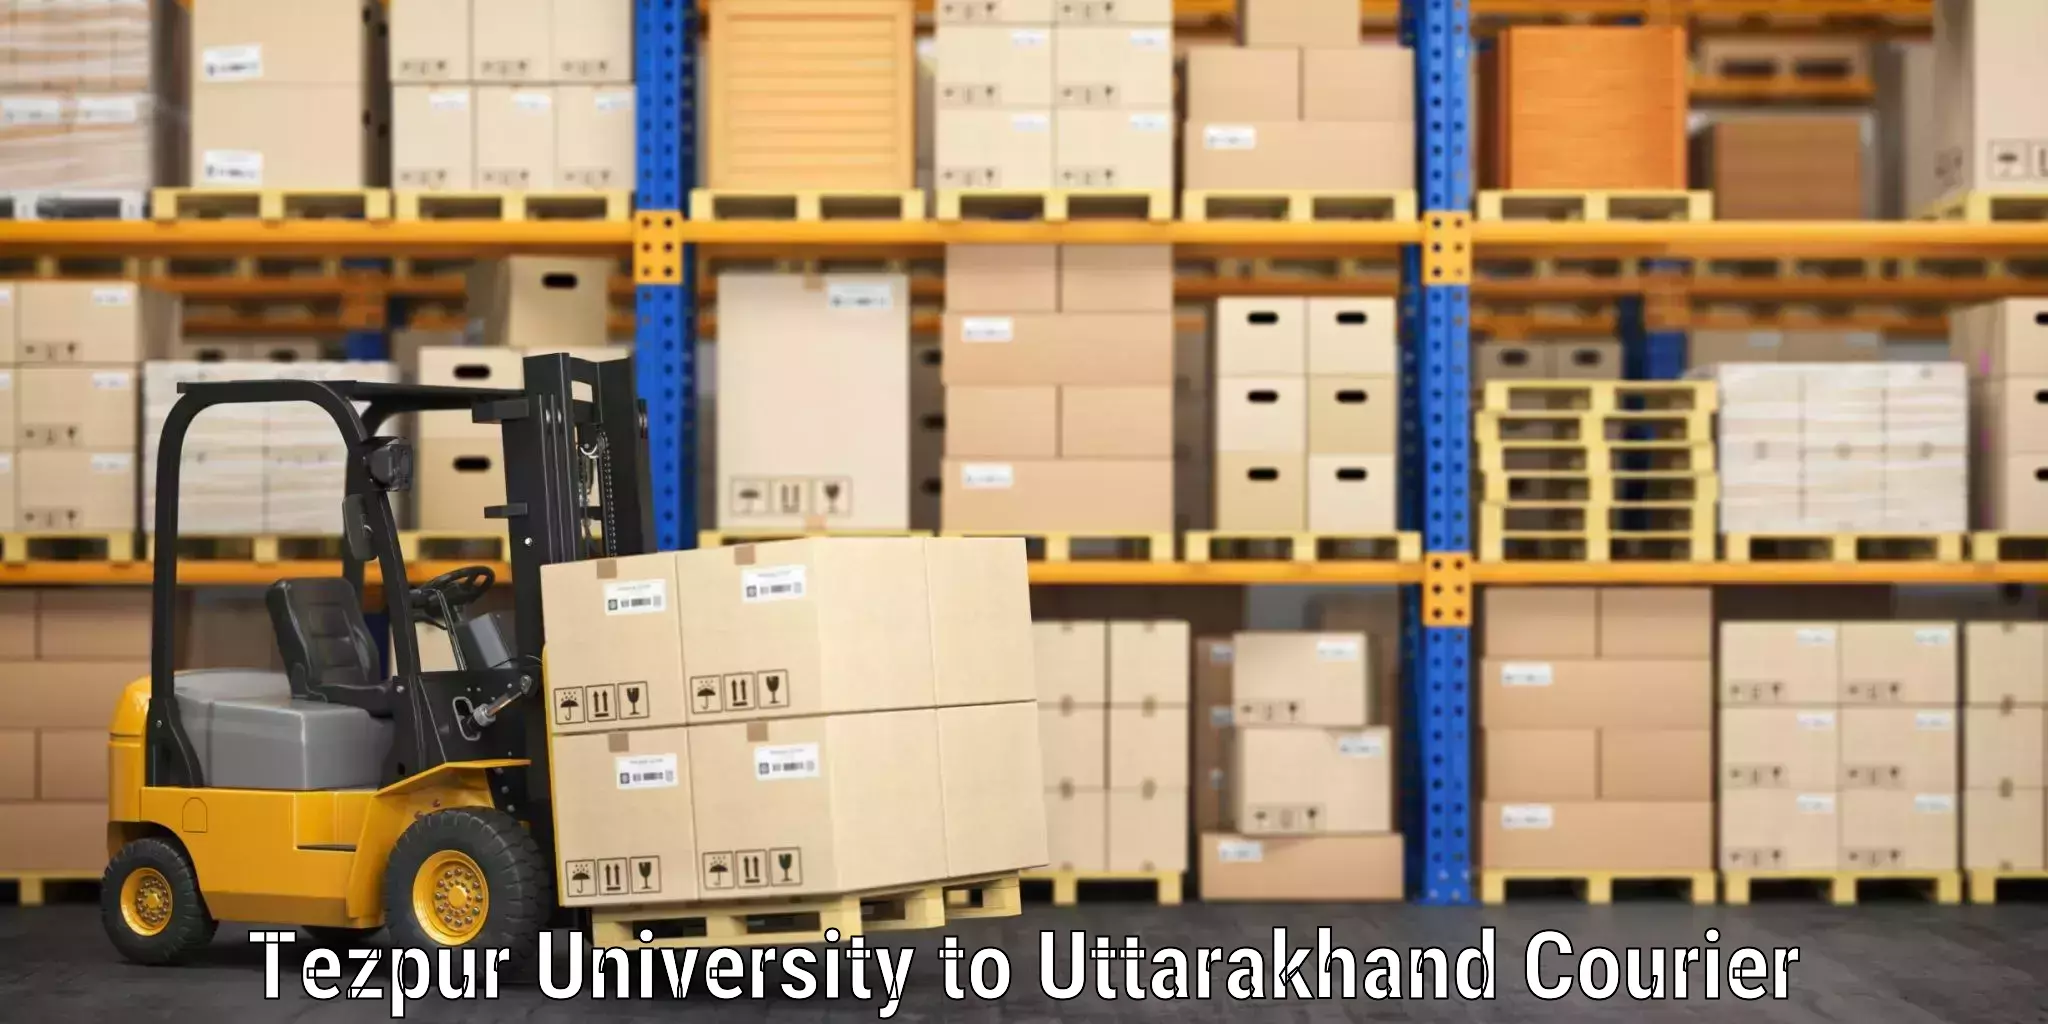 International baggage delivery Tezpur University to Haridwar